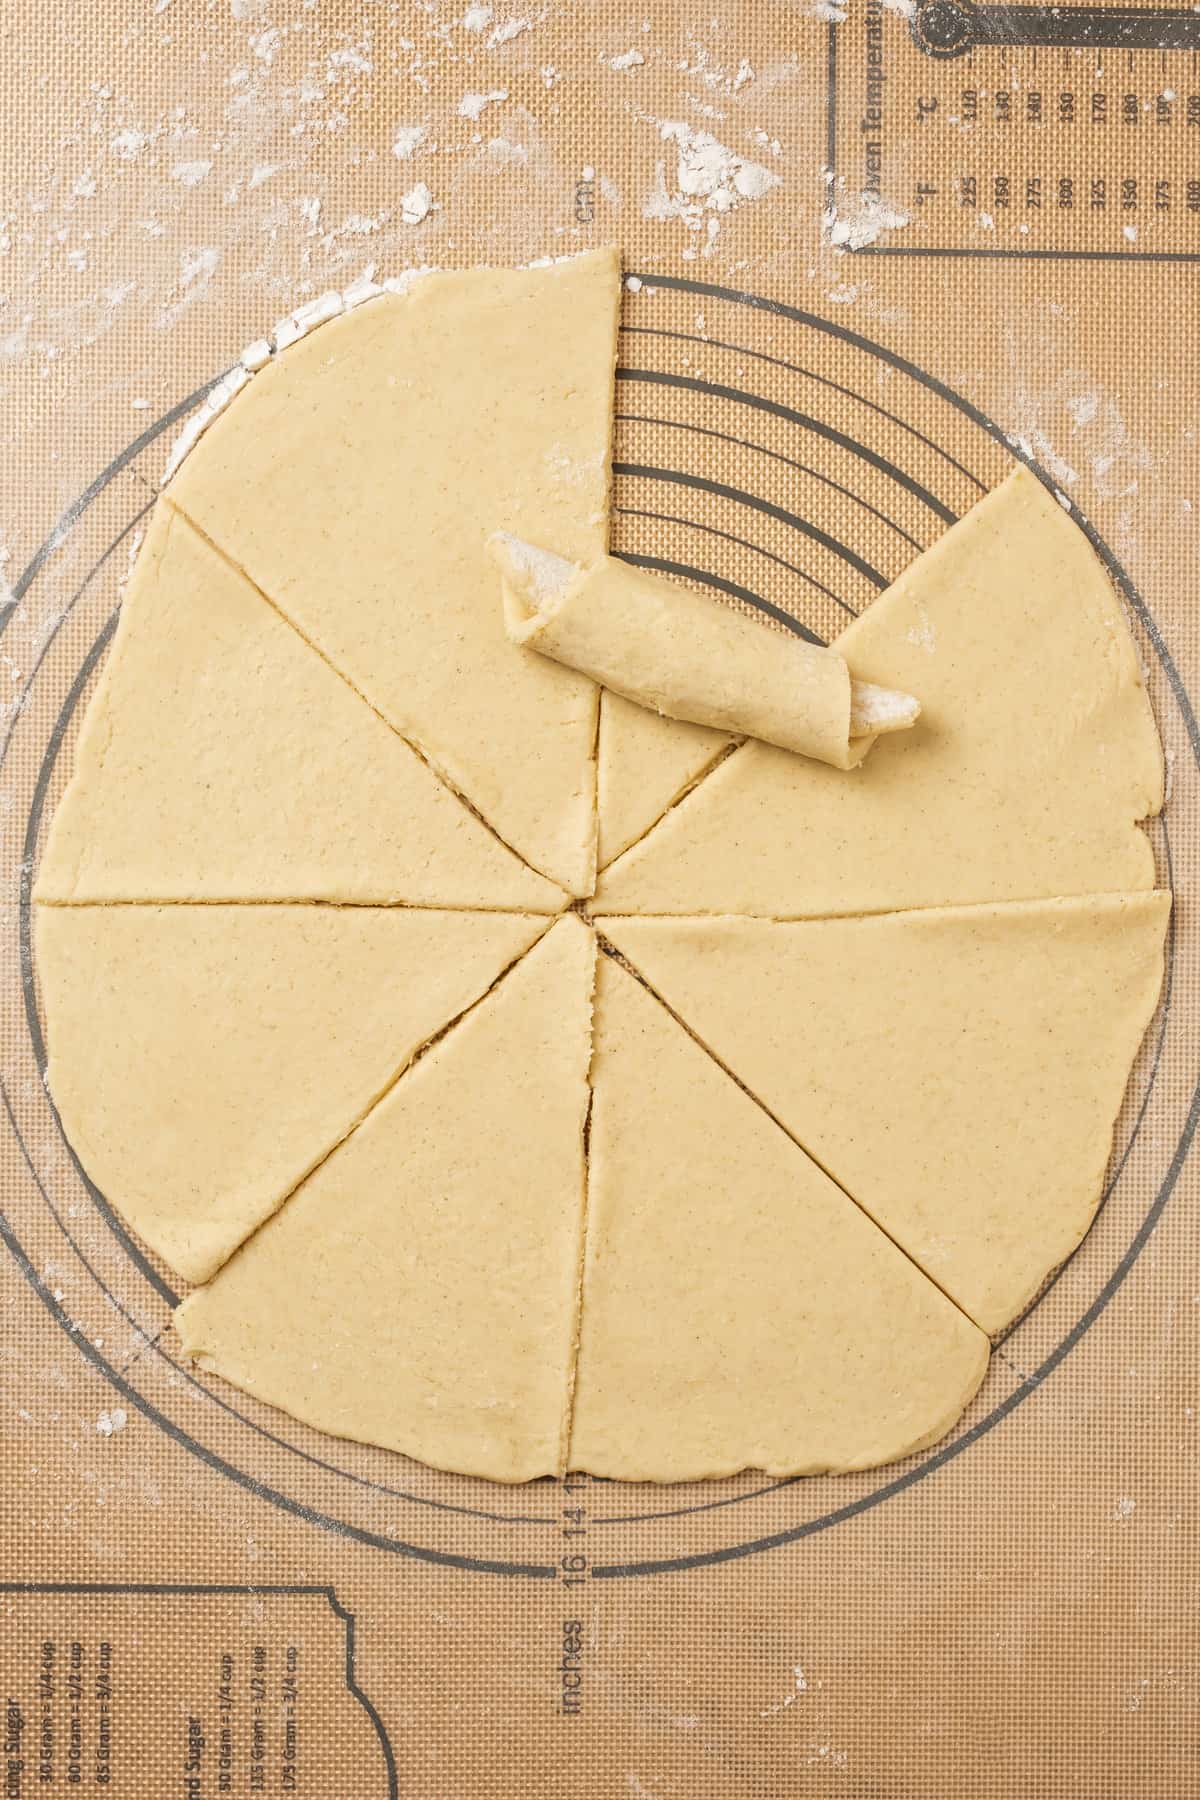 One of eight dough triangles is rolled into a crescent shape on a floured surface.